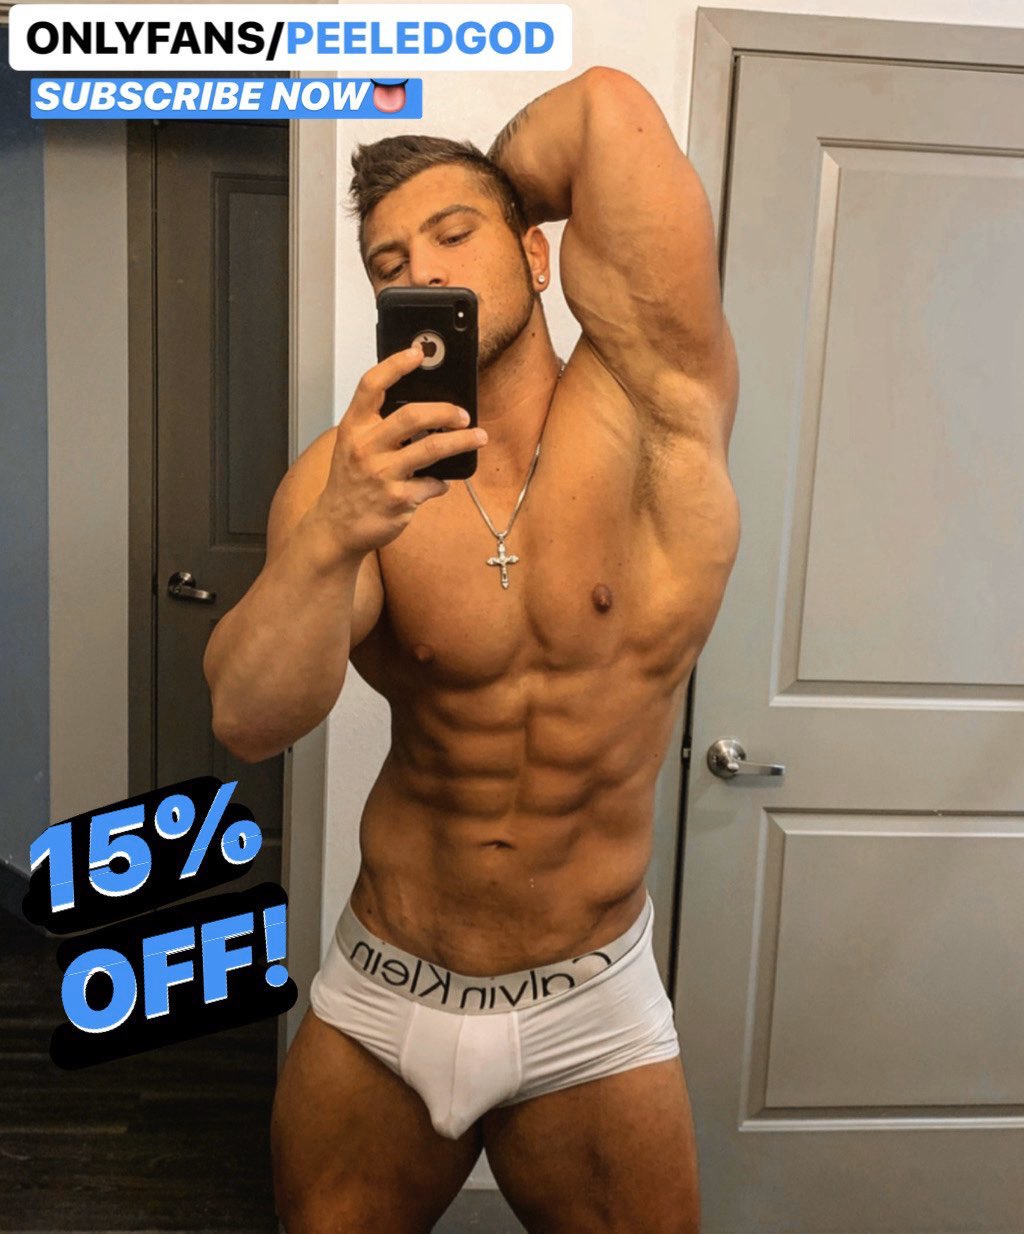 Free onlyfans get How to